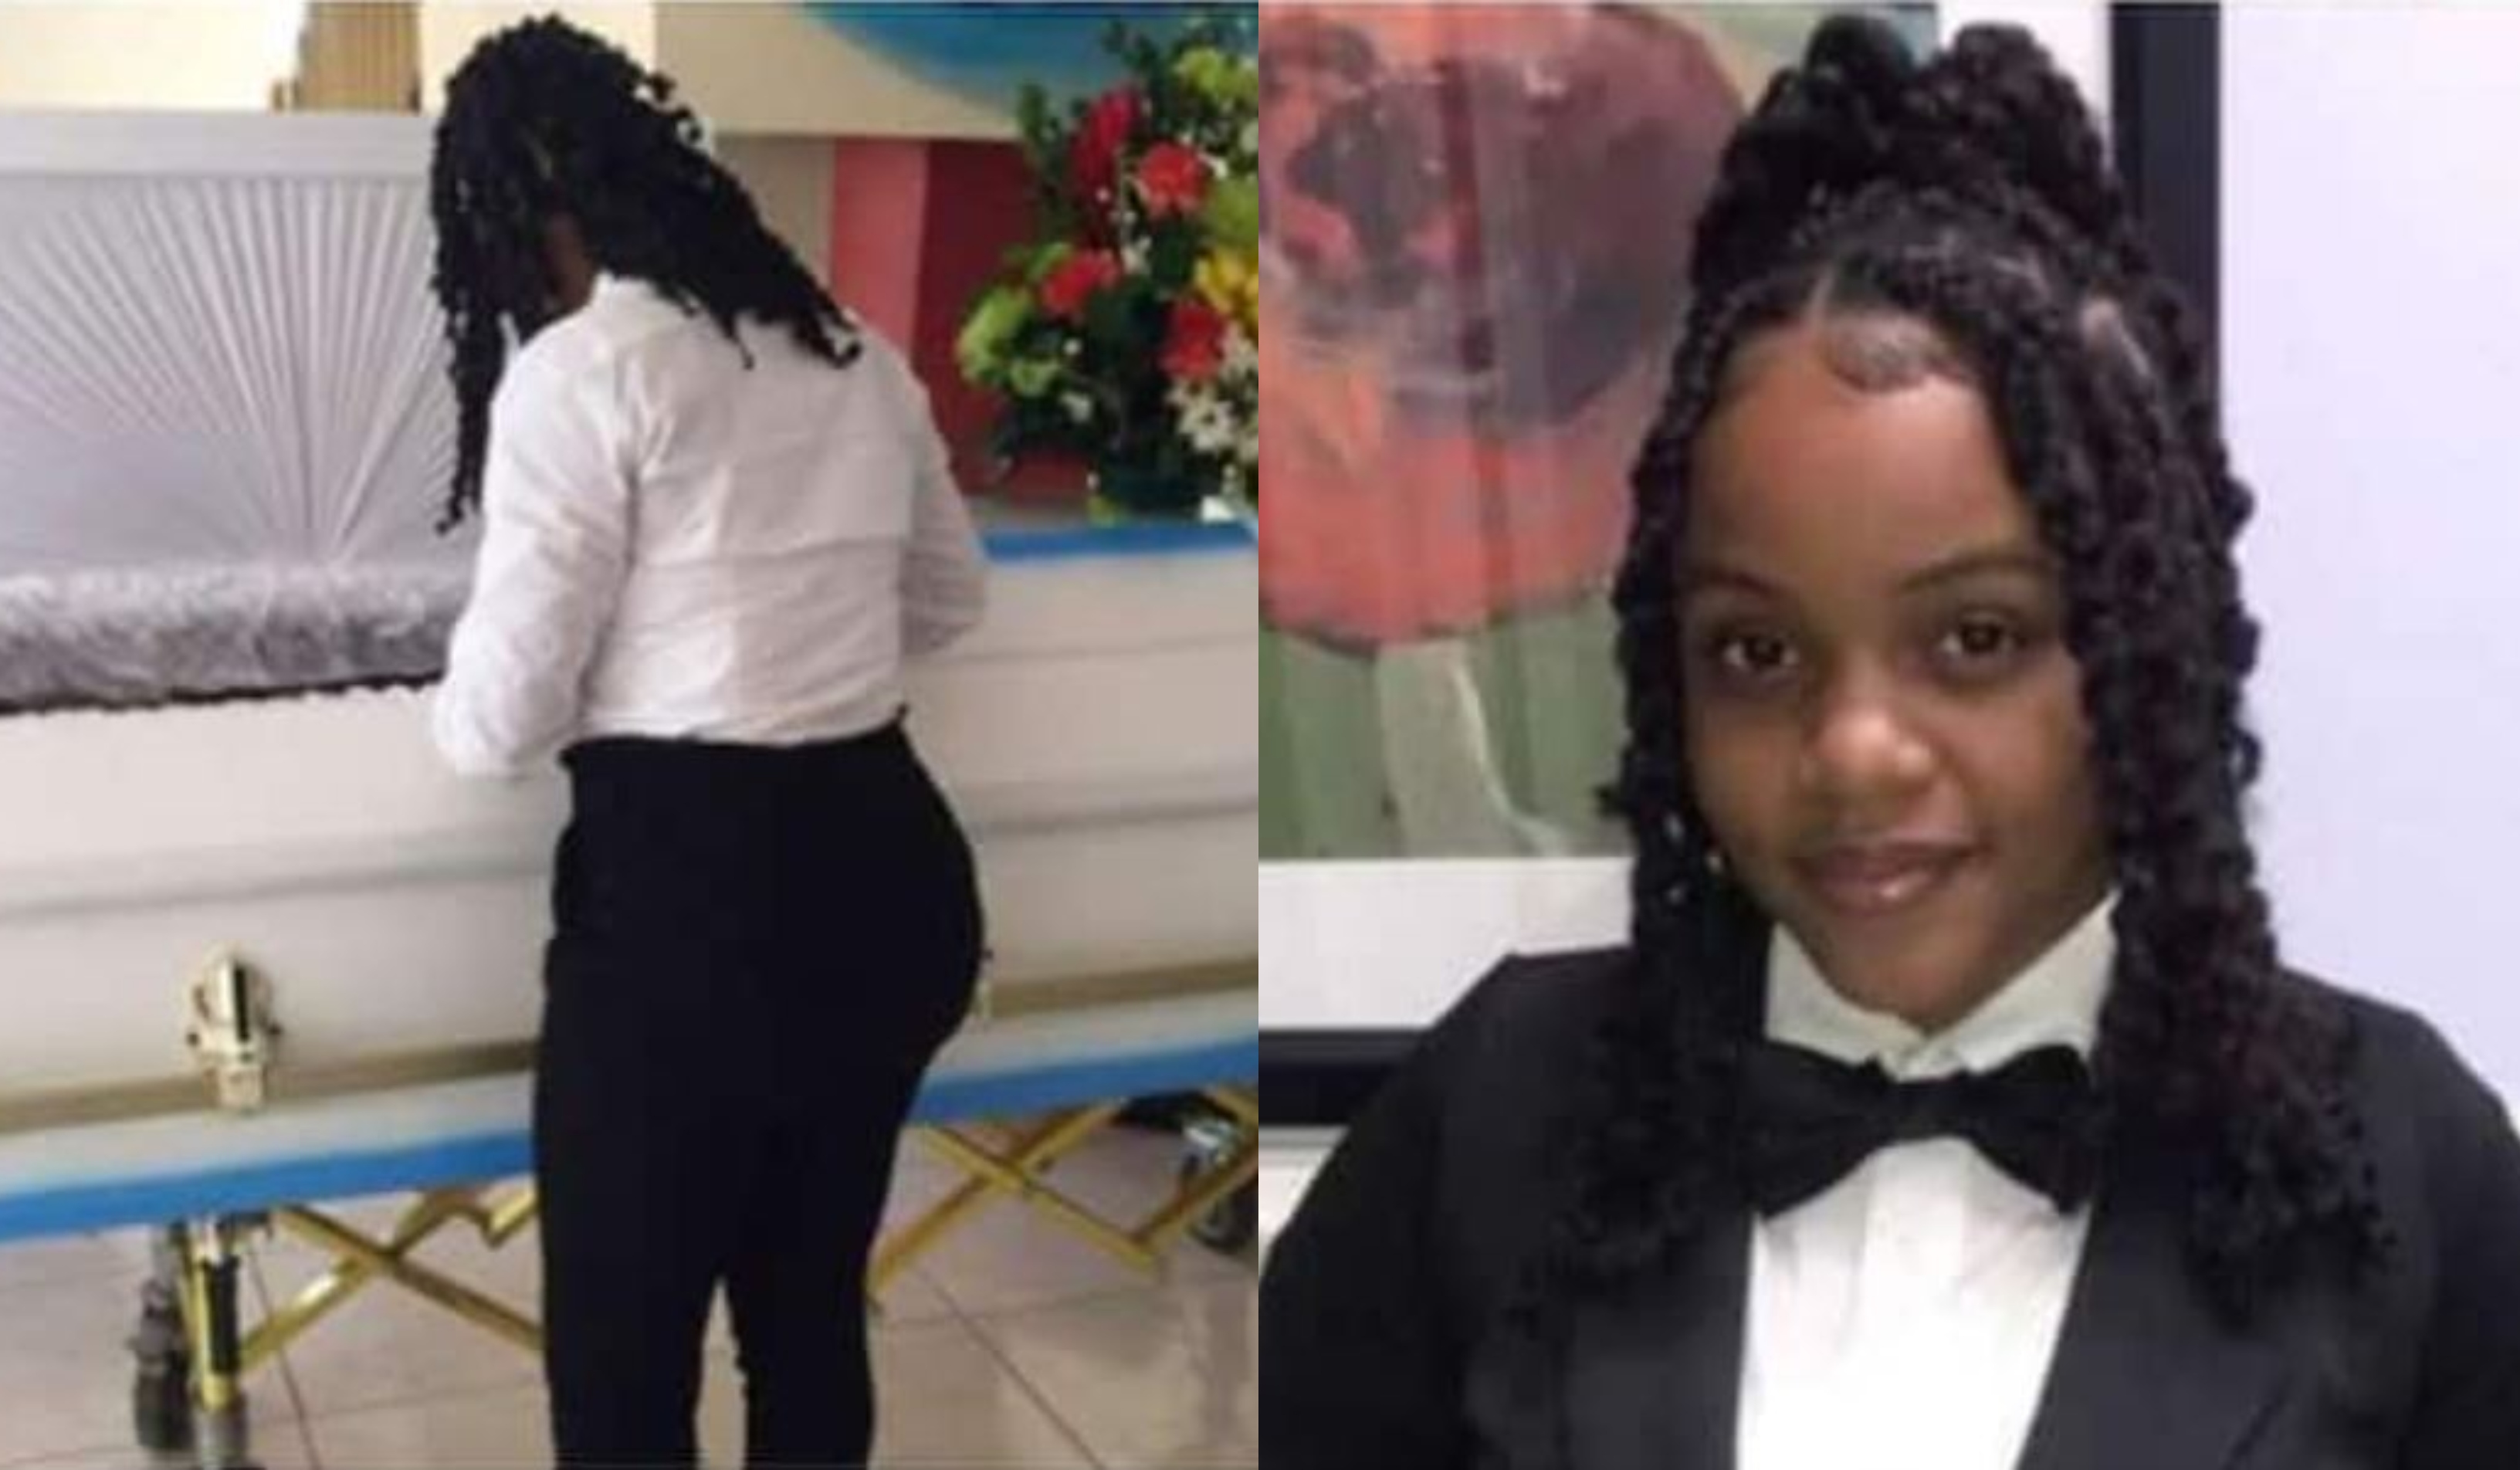 "I've passion for this; I feel like it’s an honour" – 19-year-old female mortuary worker